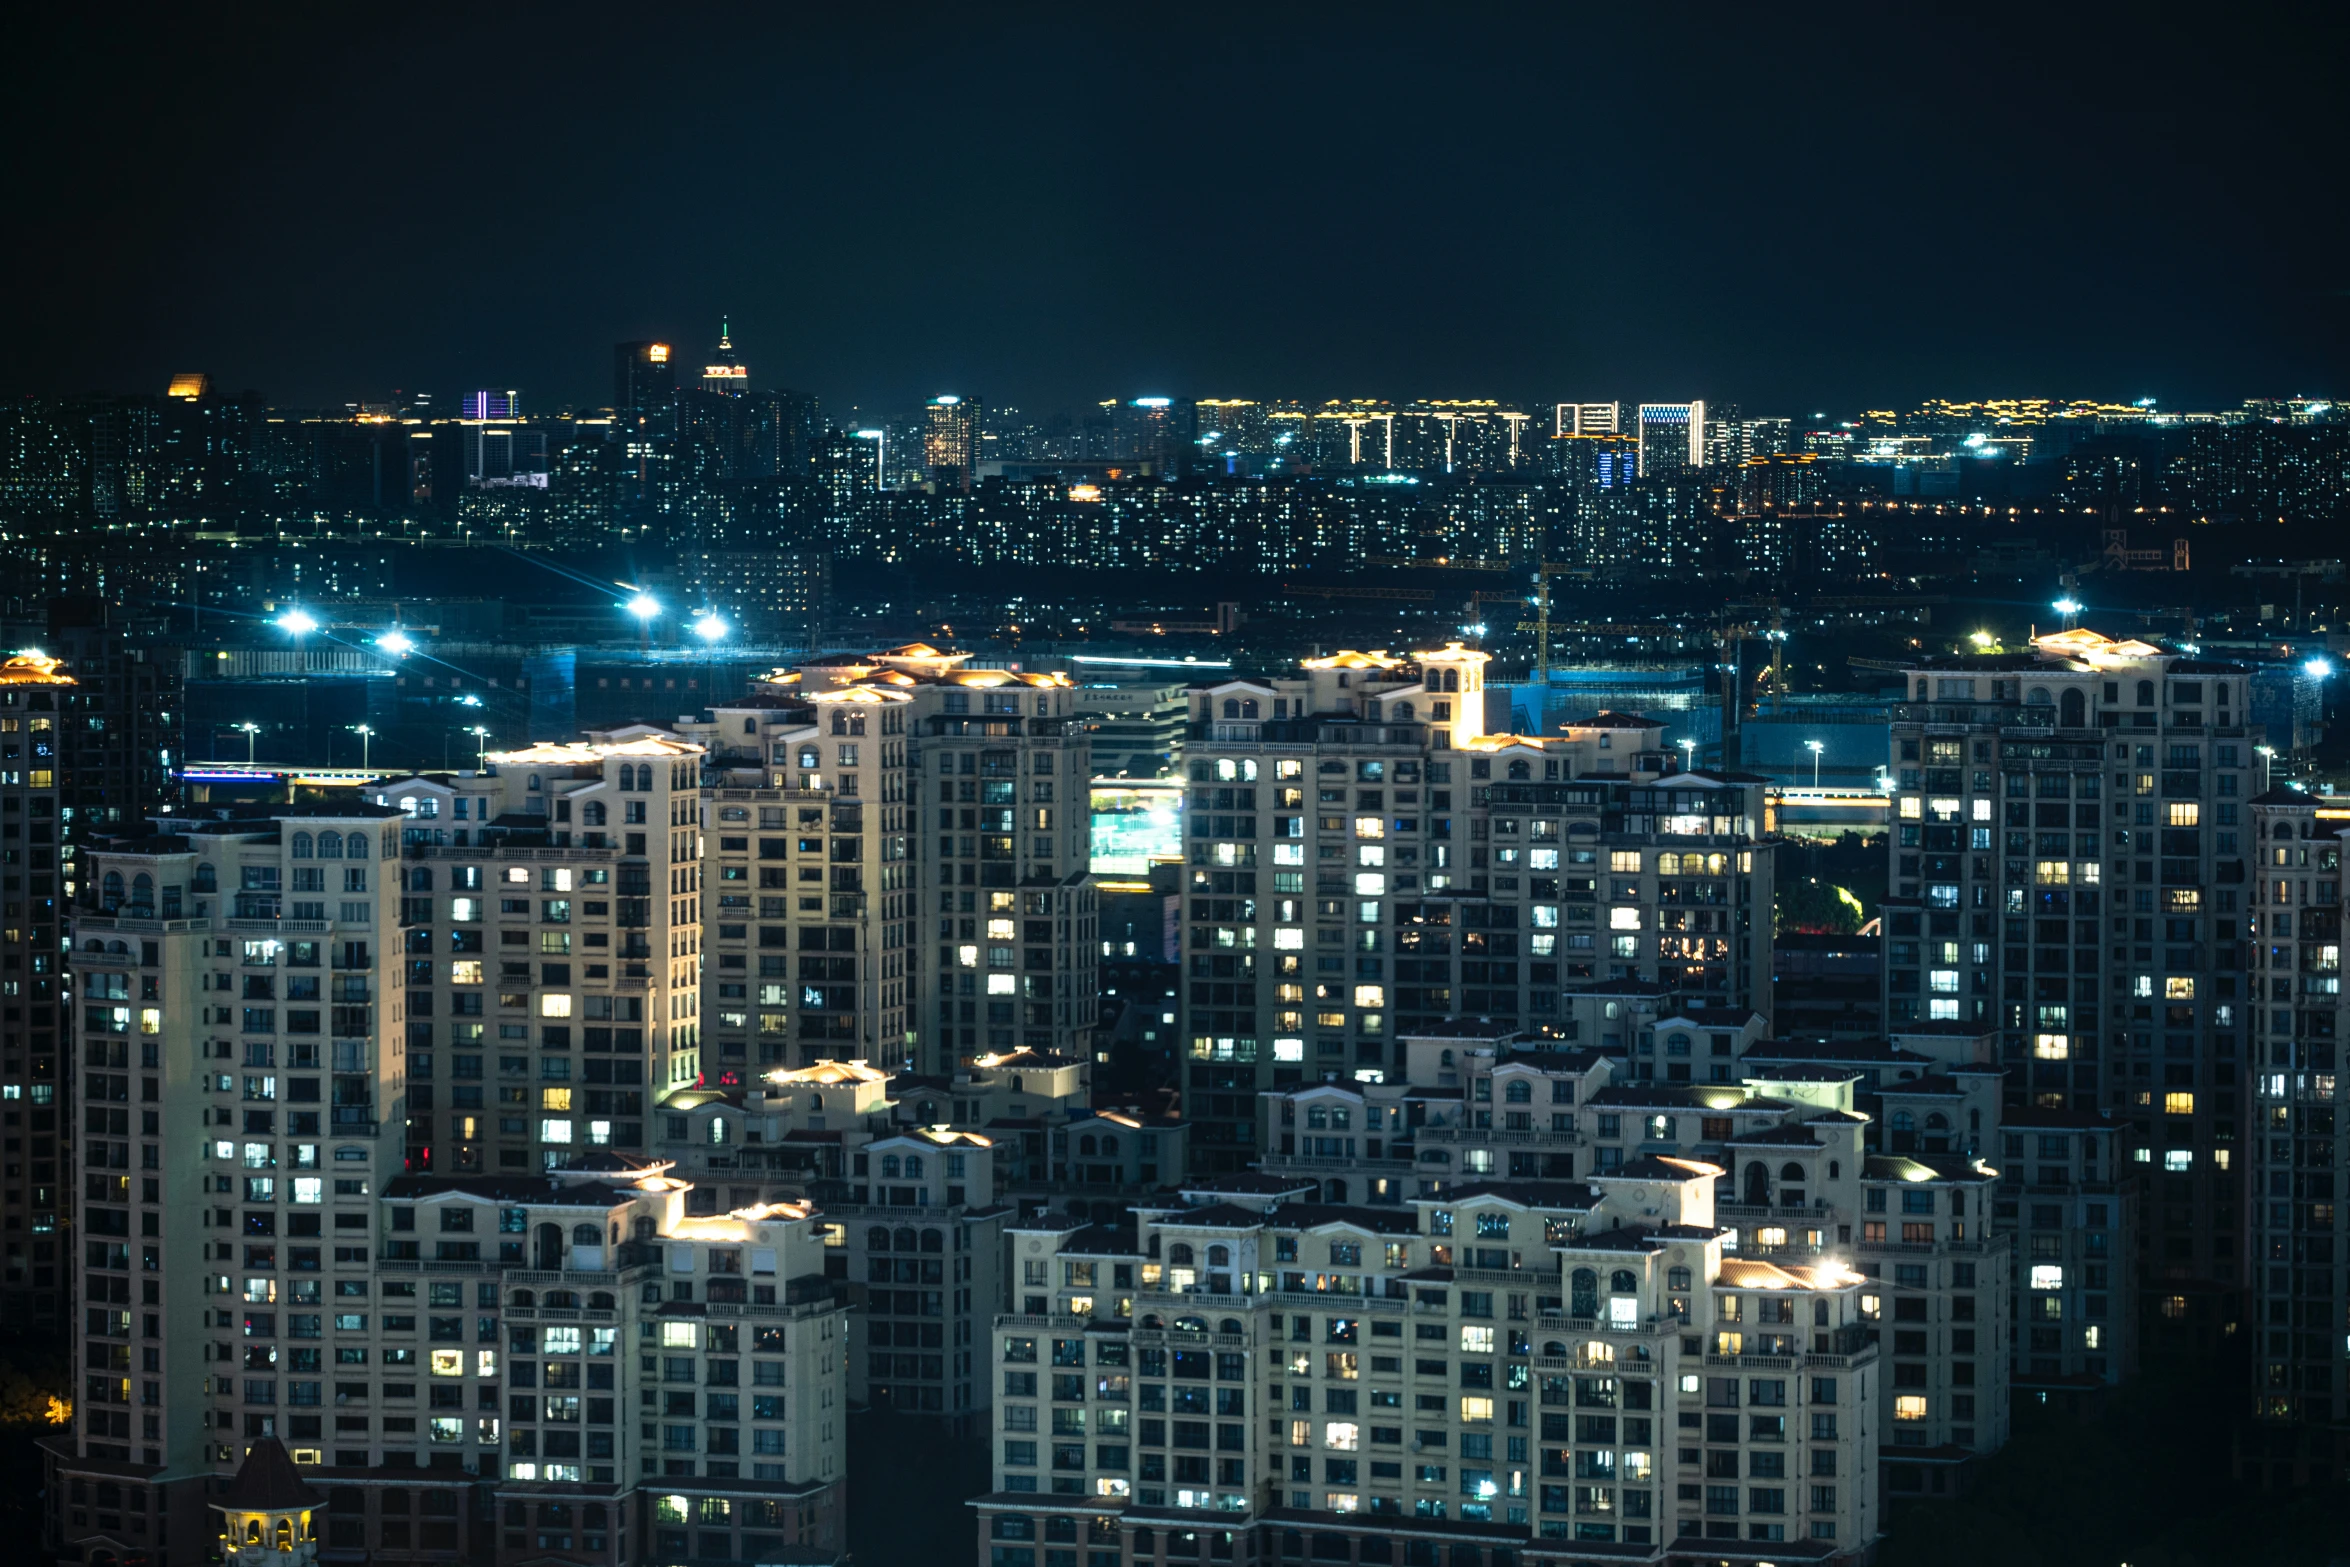 the view from a hill at night shows several buildings in a city